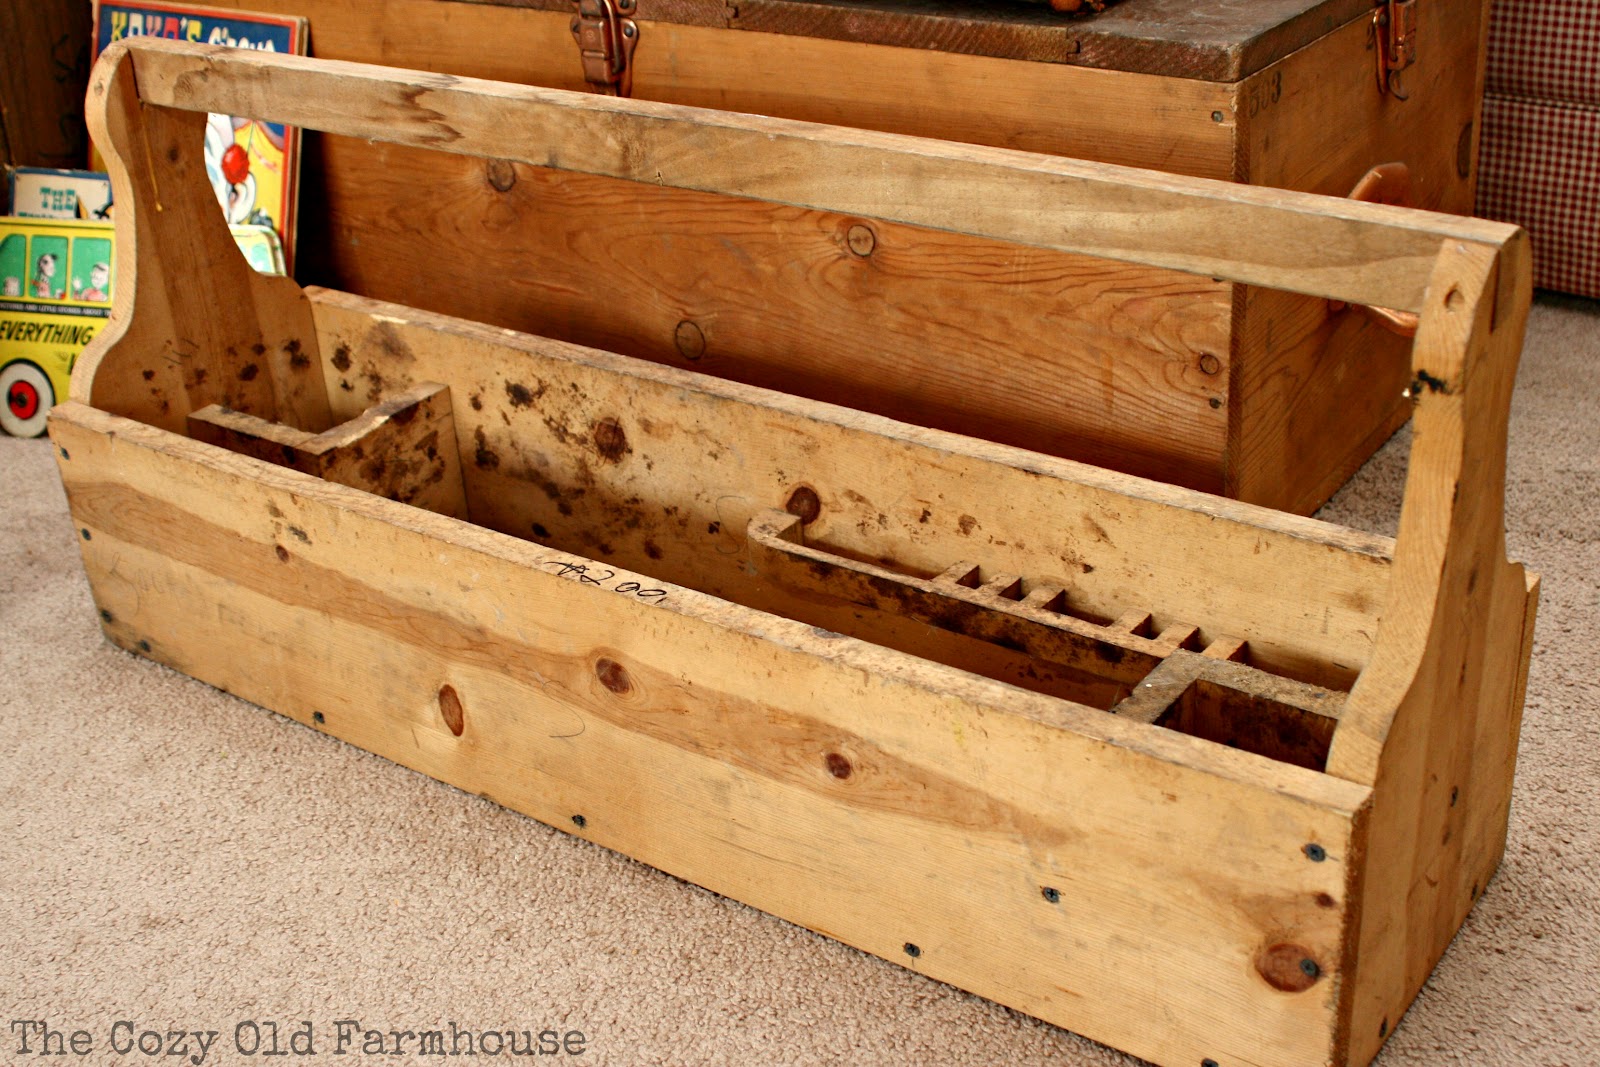 Simple Wooden Boxes Plans A great wooden toolbox for $2.